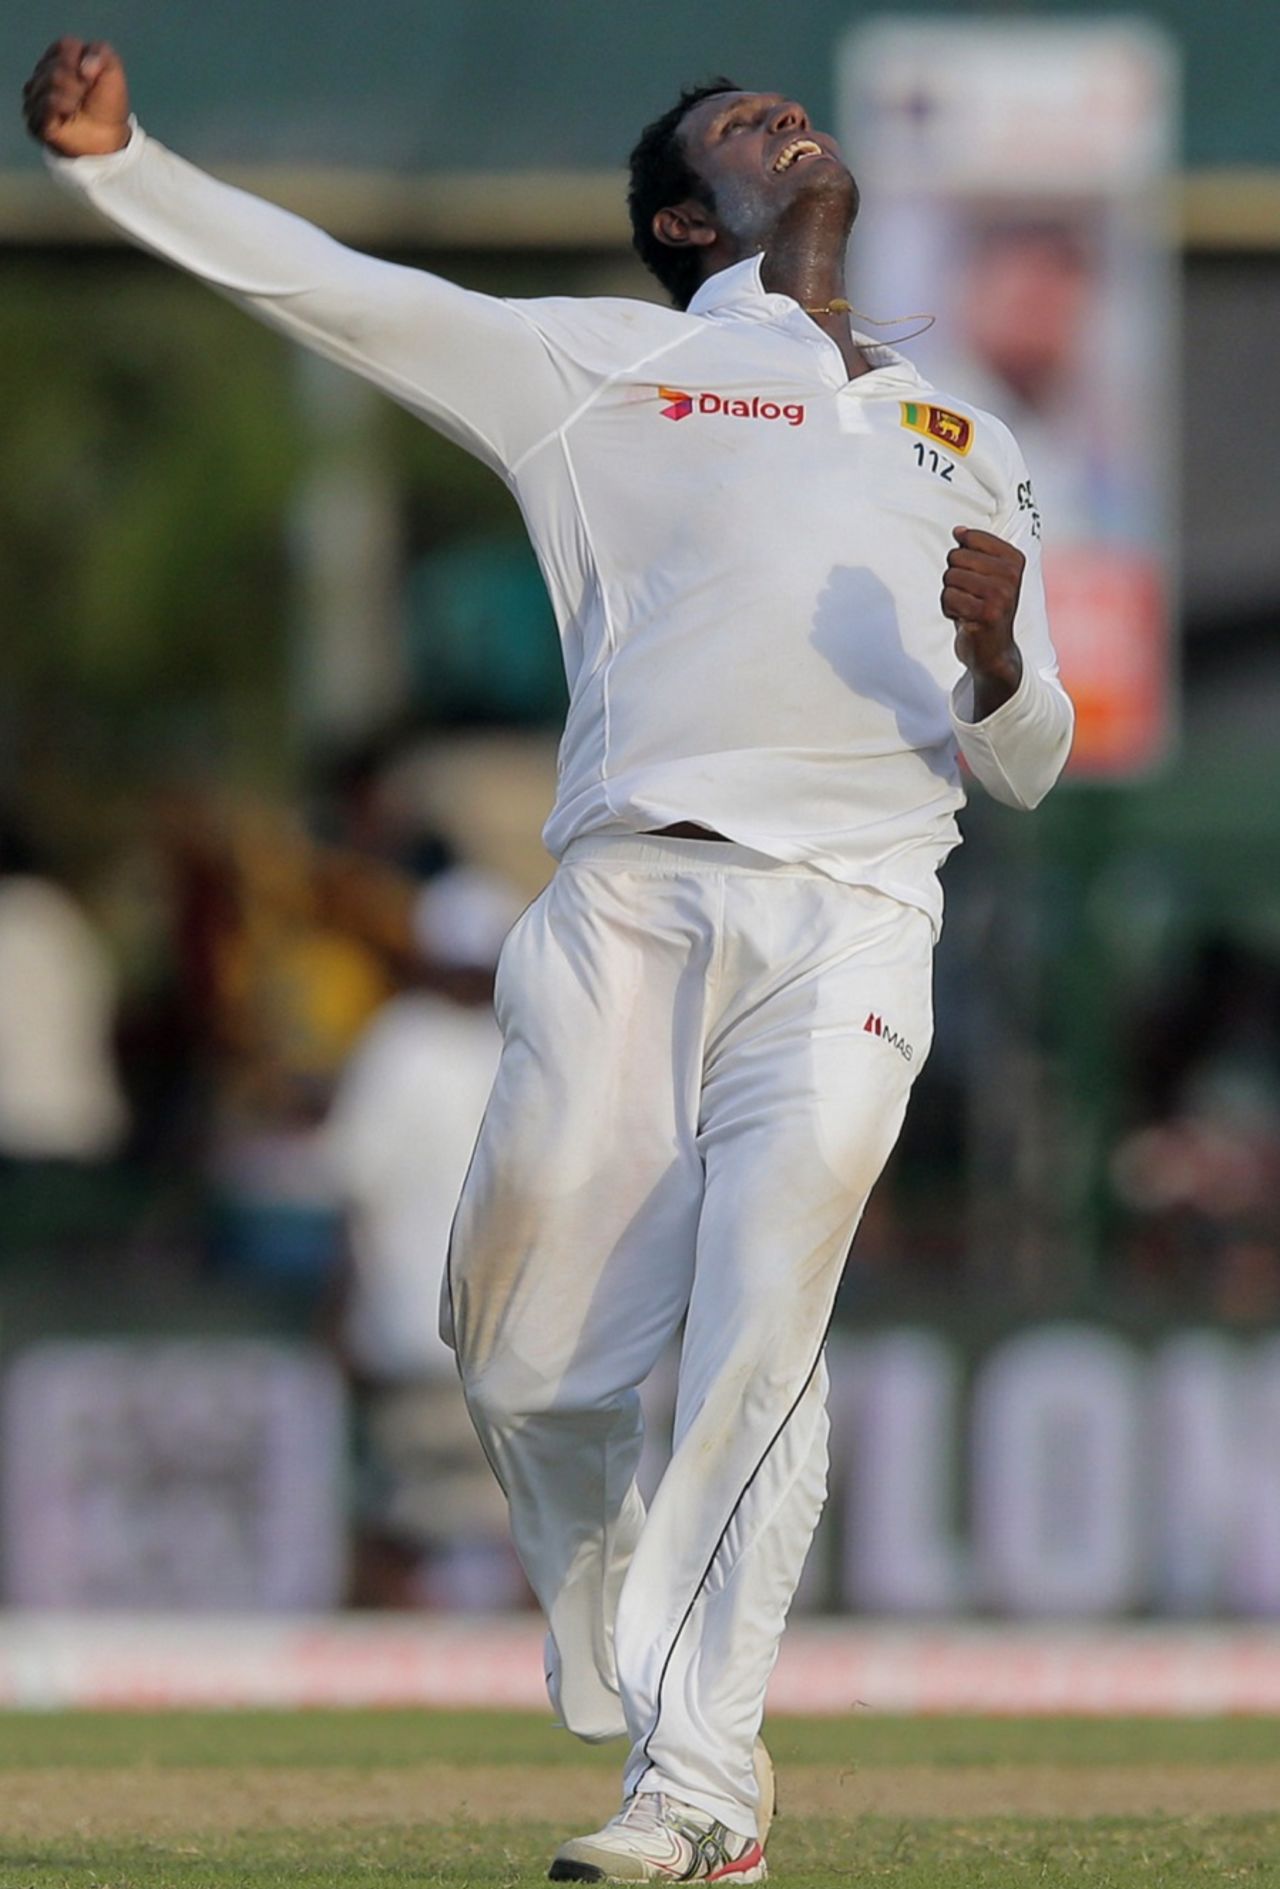 Angelo Mathews is over the moon after dismissing Rohit Sharma, Sri Lanka v India, 2nd Test, P Sara Oval, Colombo, 1st day, August 20, 2015